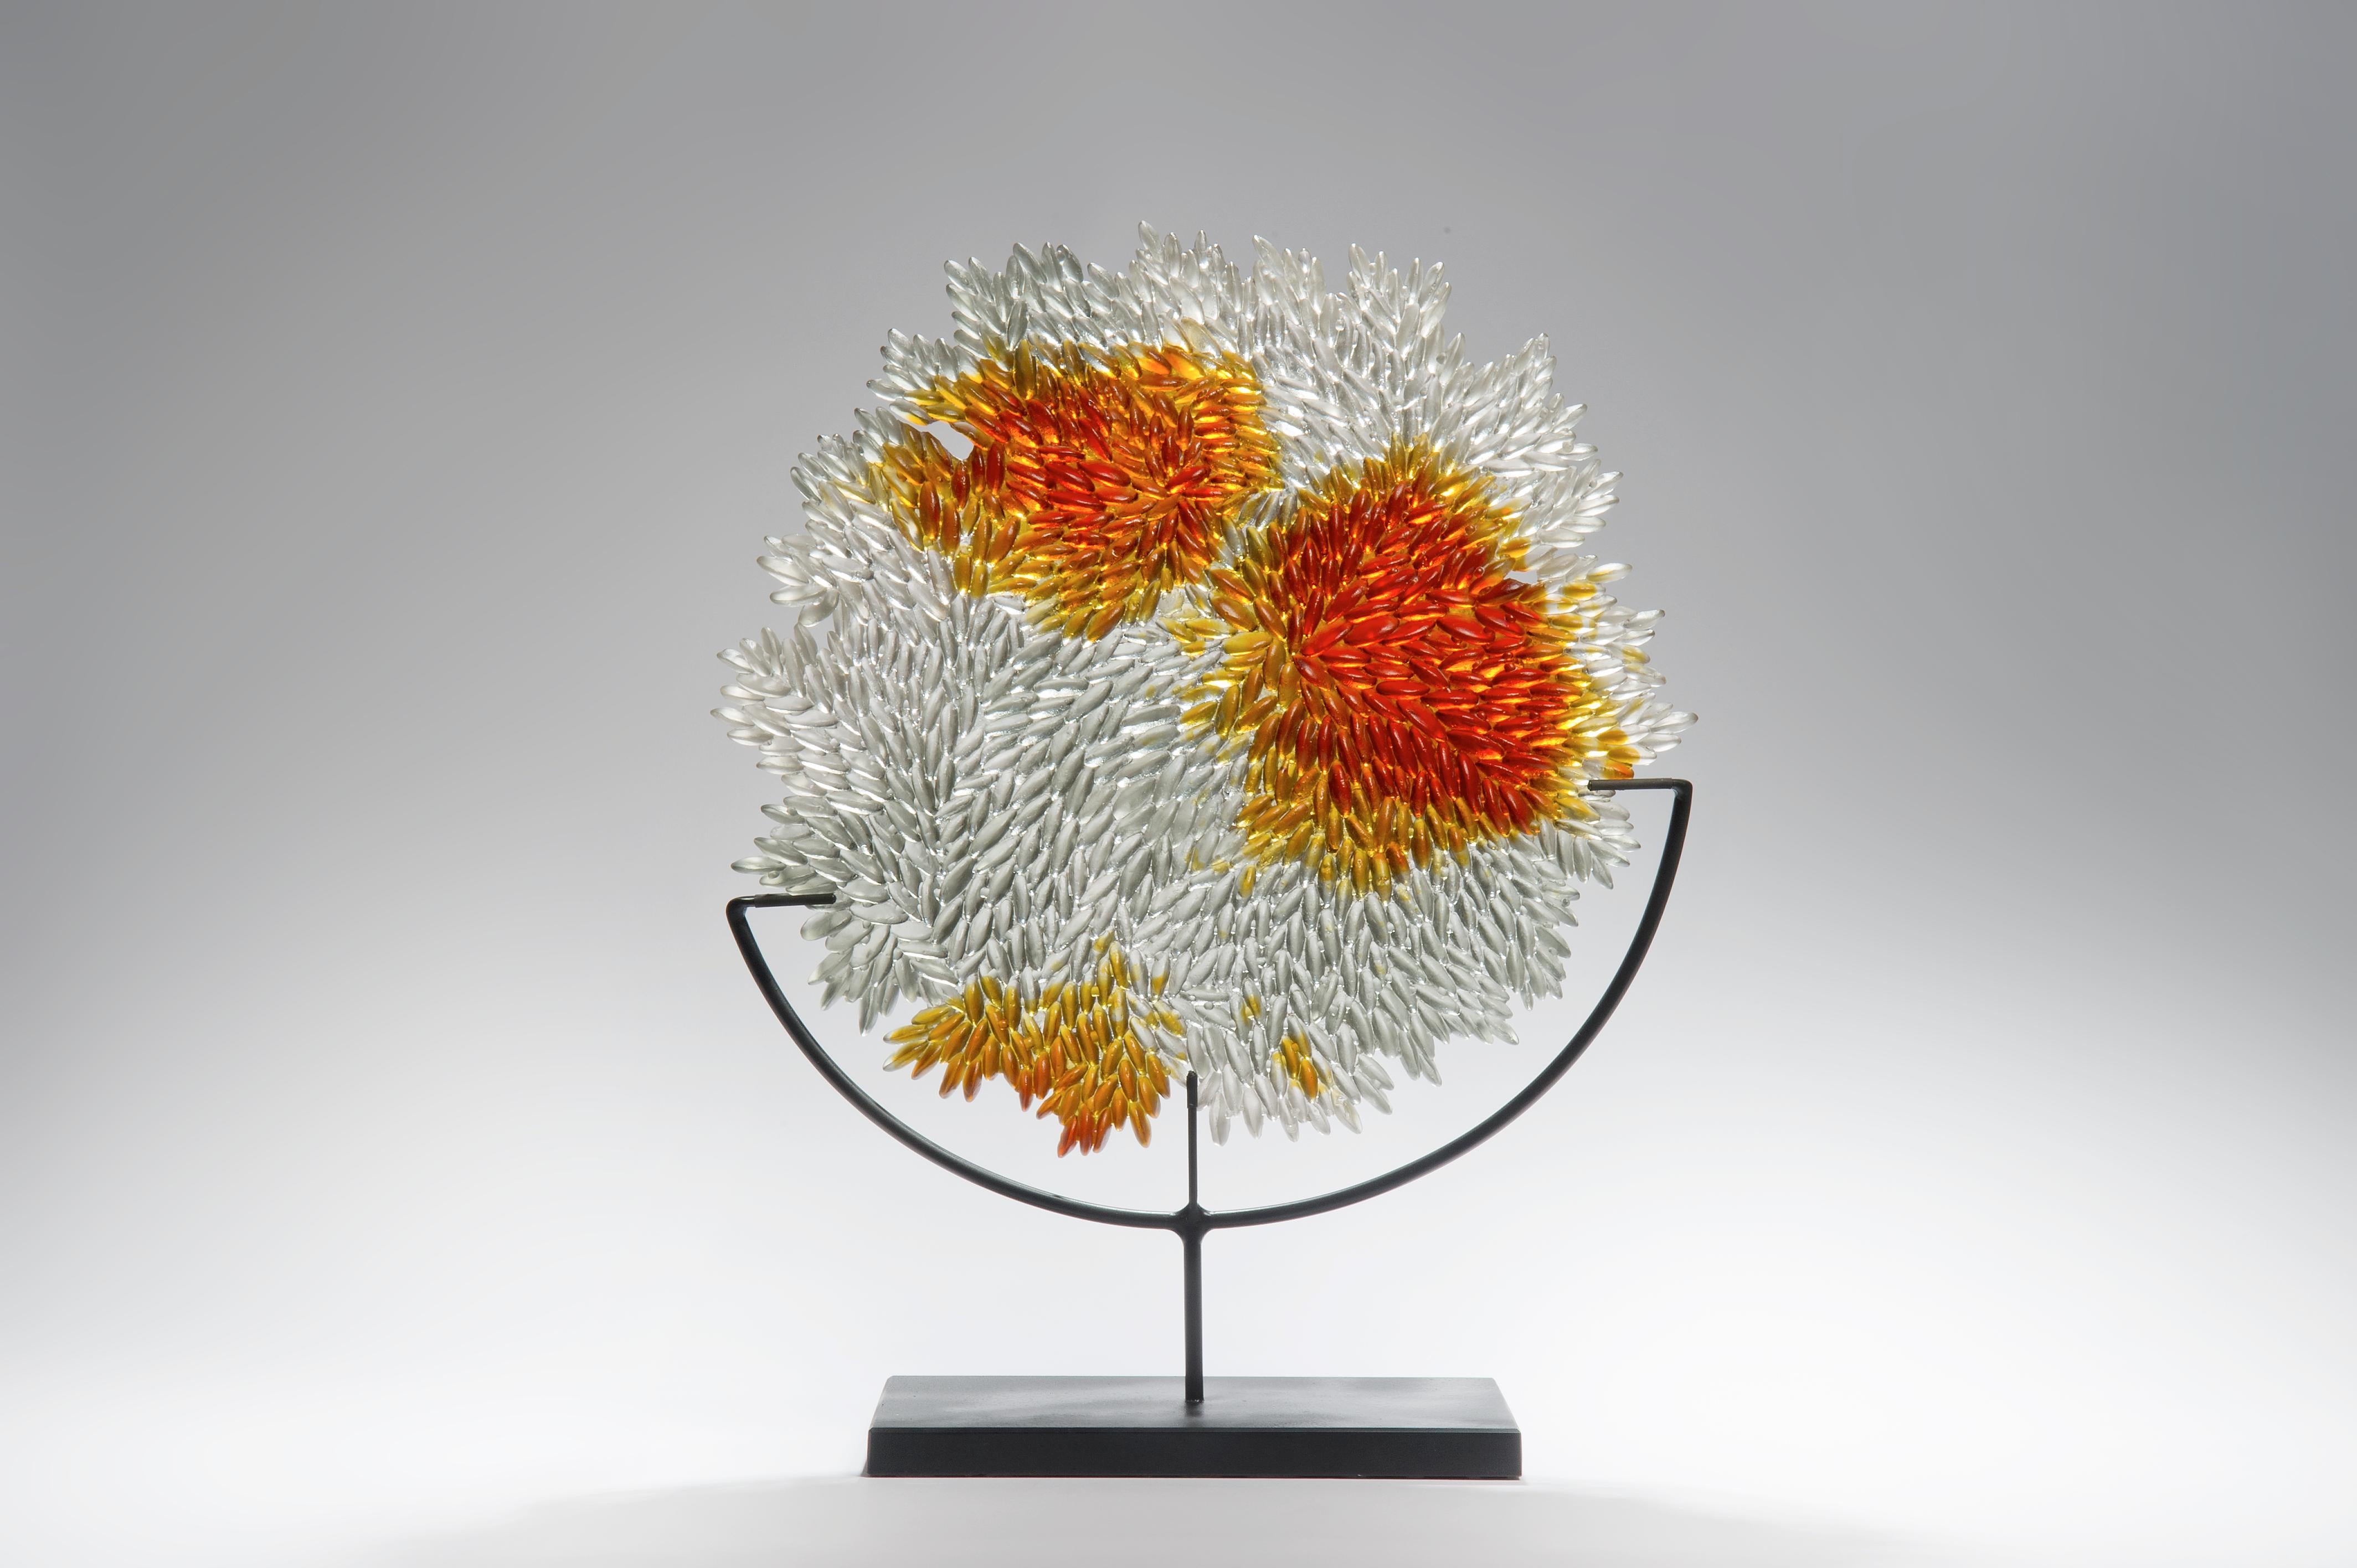 Grown Round is a unique textured mounted glass sculpture in clear & amber by the British artist Nina Casson McGarva. The piece comes with a black steel stand.

Casson McGarva firstly casts her glass in a flat mould where she introduces all of the